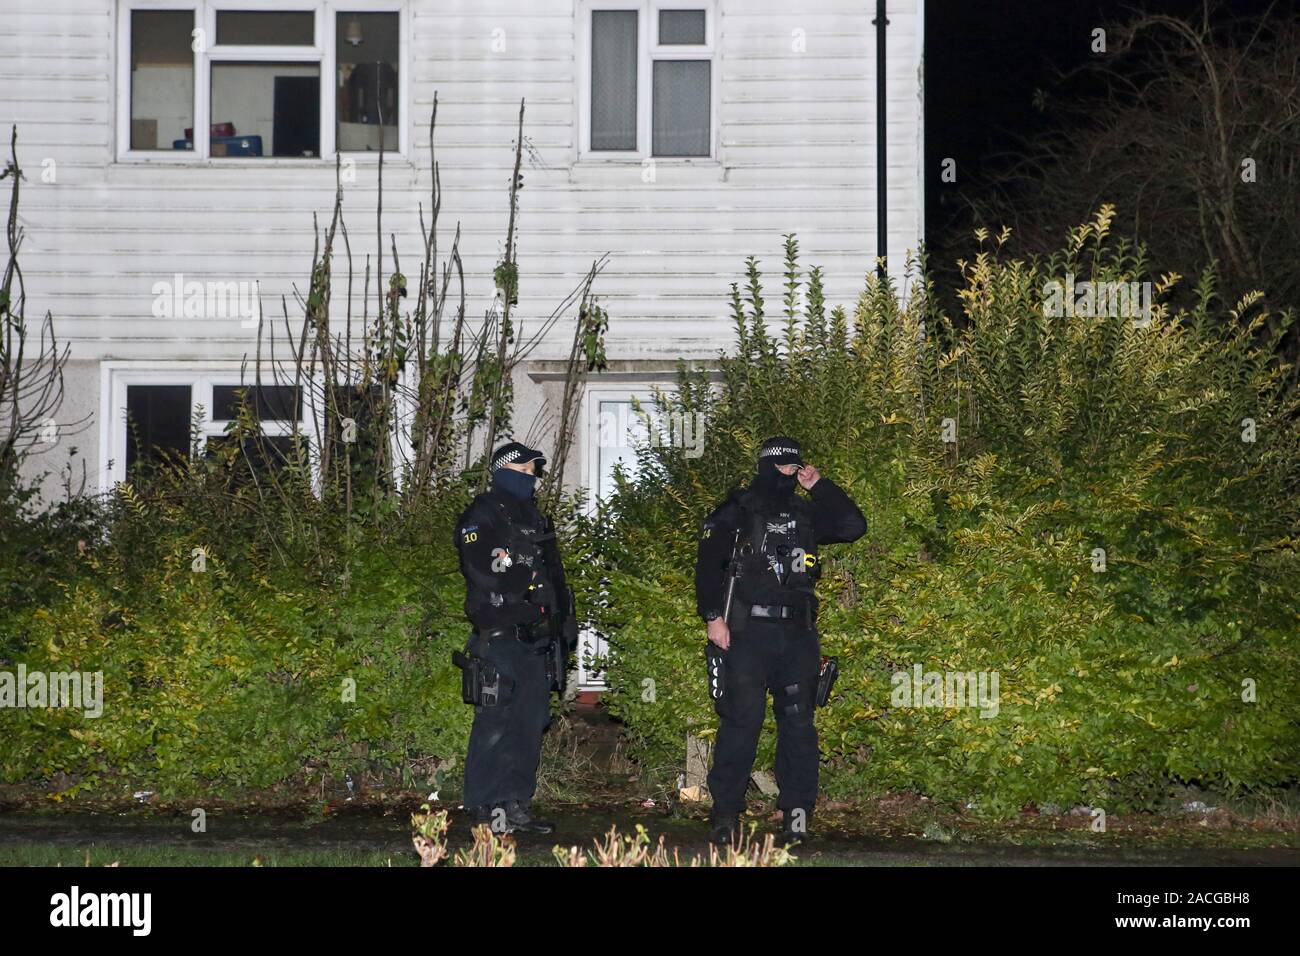 Armed police stand outside a house in Loughton, Essex, thought to be connected to Terry Glover who is currently wanted for questioning after a serious crash near a secondary school on Monday left a 12 year old boy dead and others seriously injured. Stock Photo